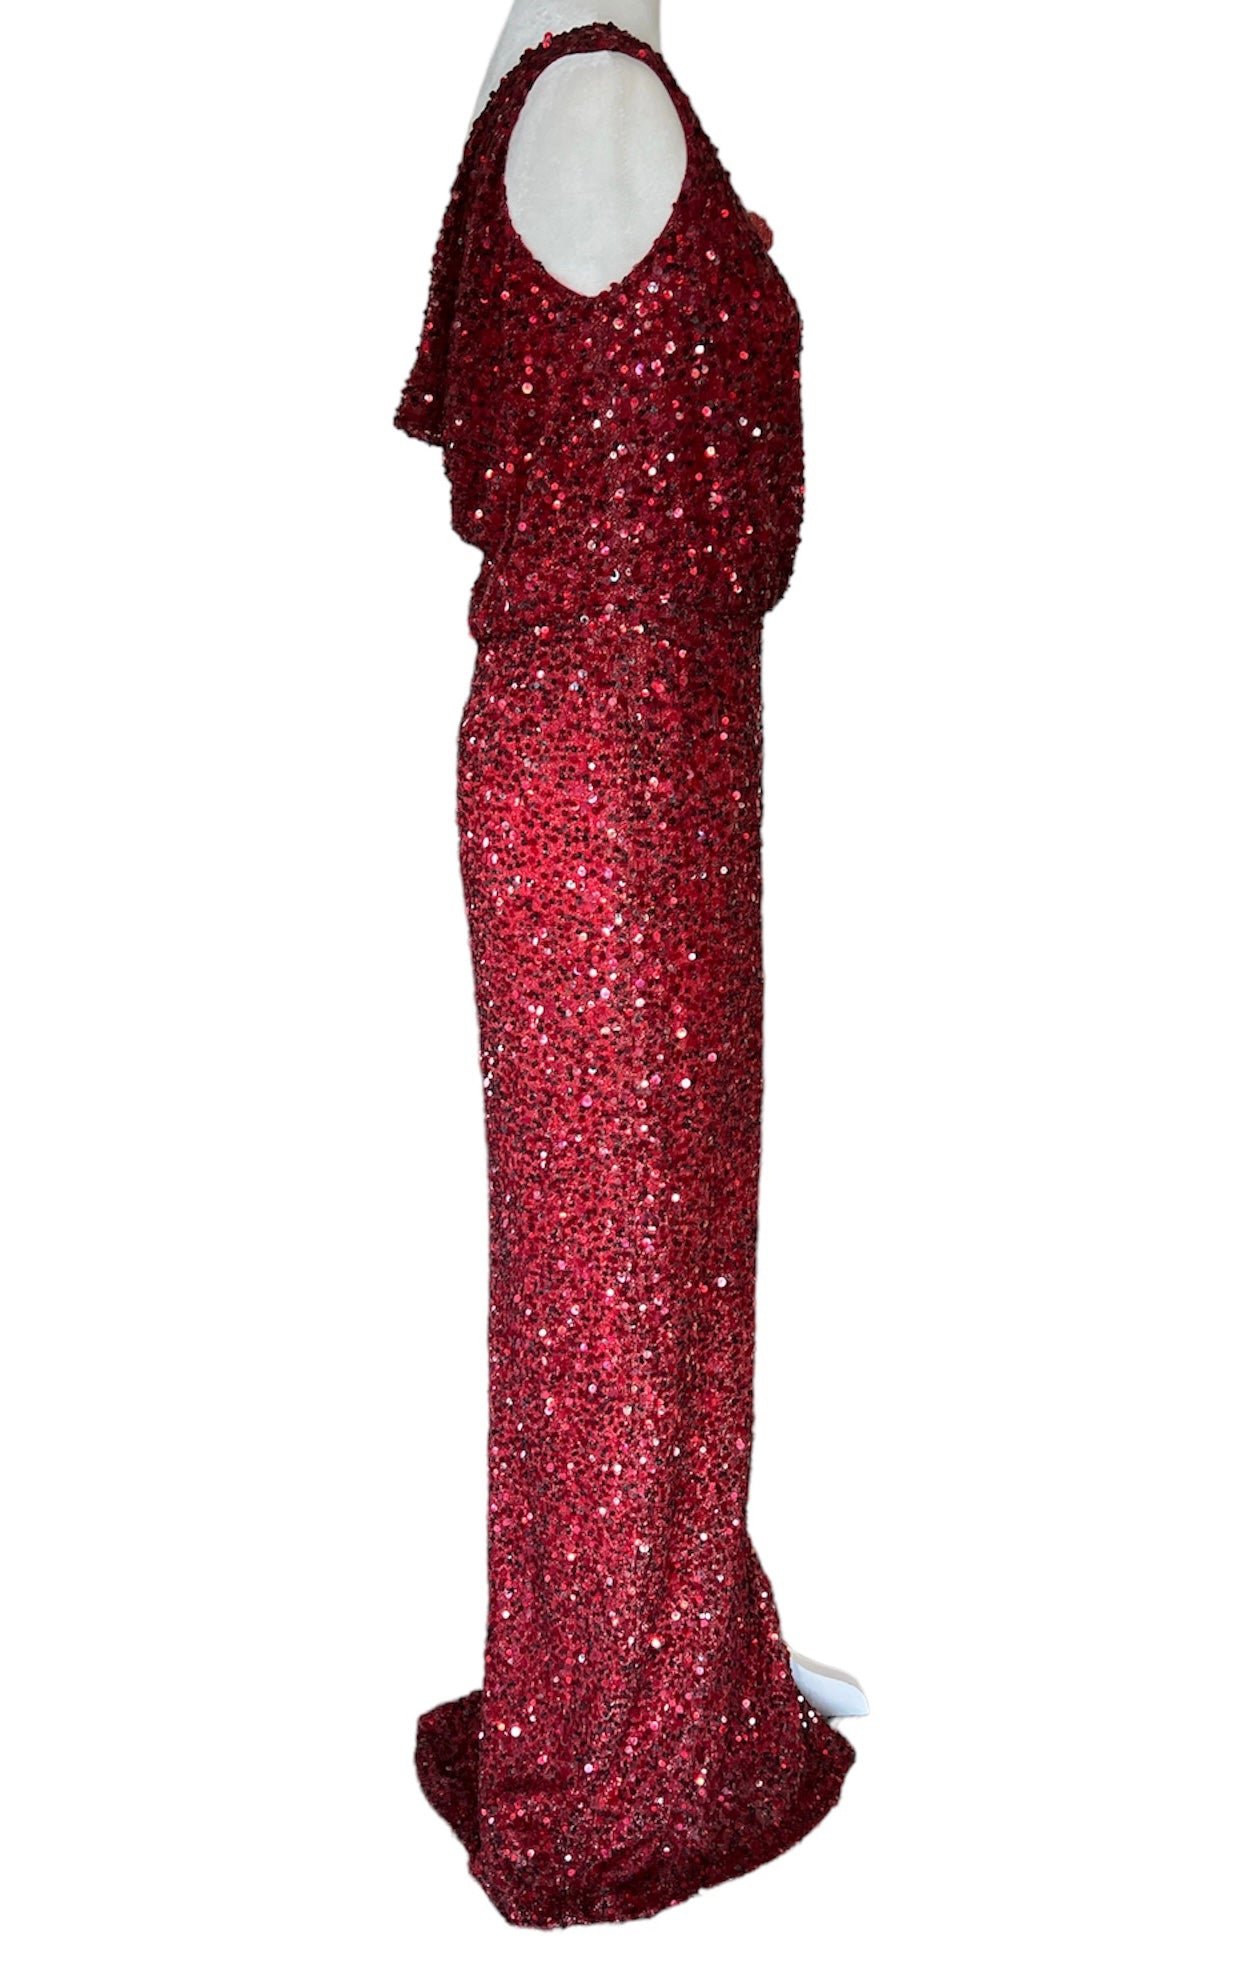 St. John Couture Red Beaded Evening Gown, 4